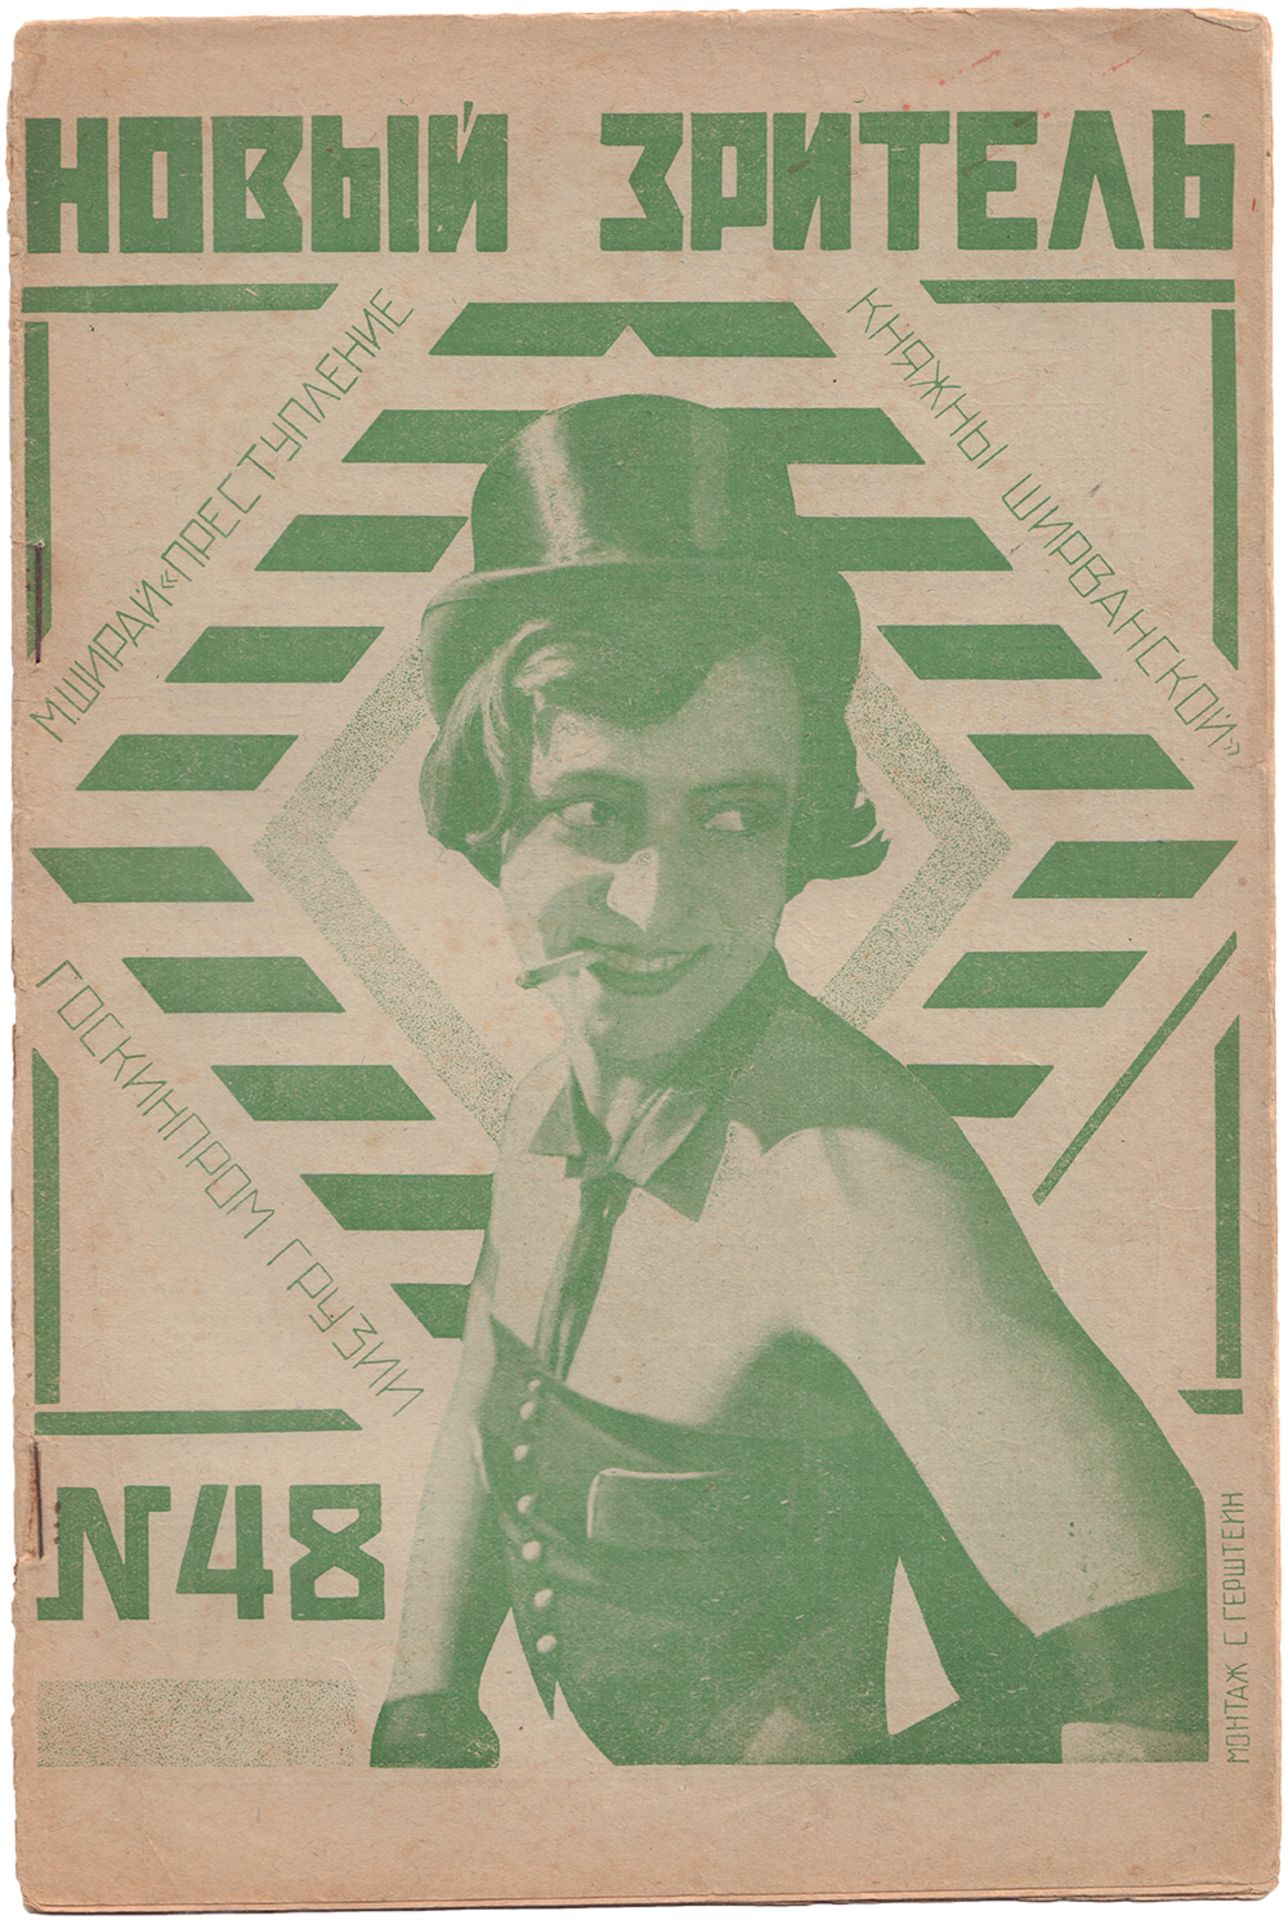 [Gershtein, S. design. Soviet art]. New viewer. Issue 48th. Moscow, 1925. - 20 pp. (including paperb